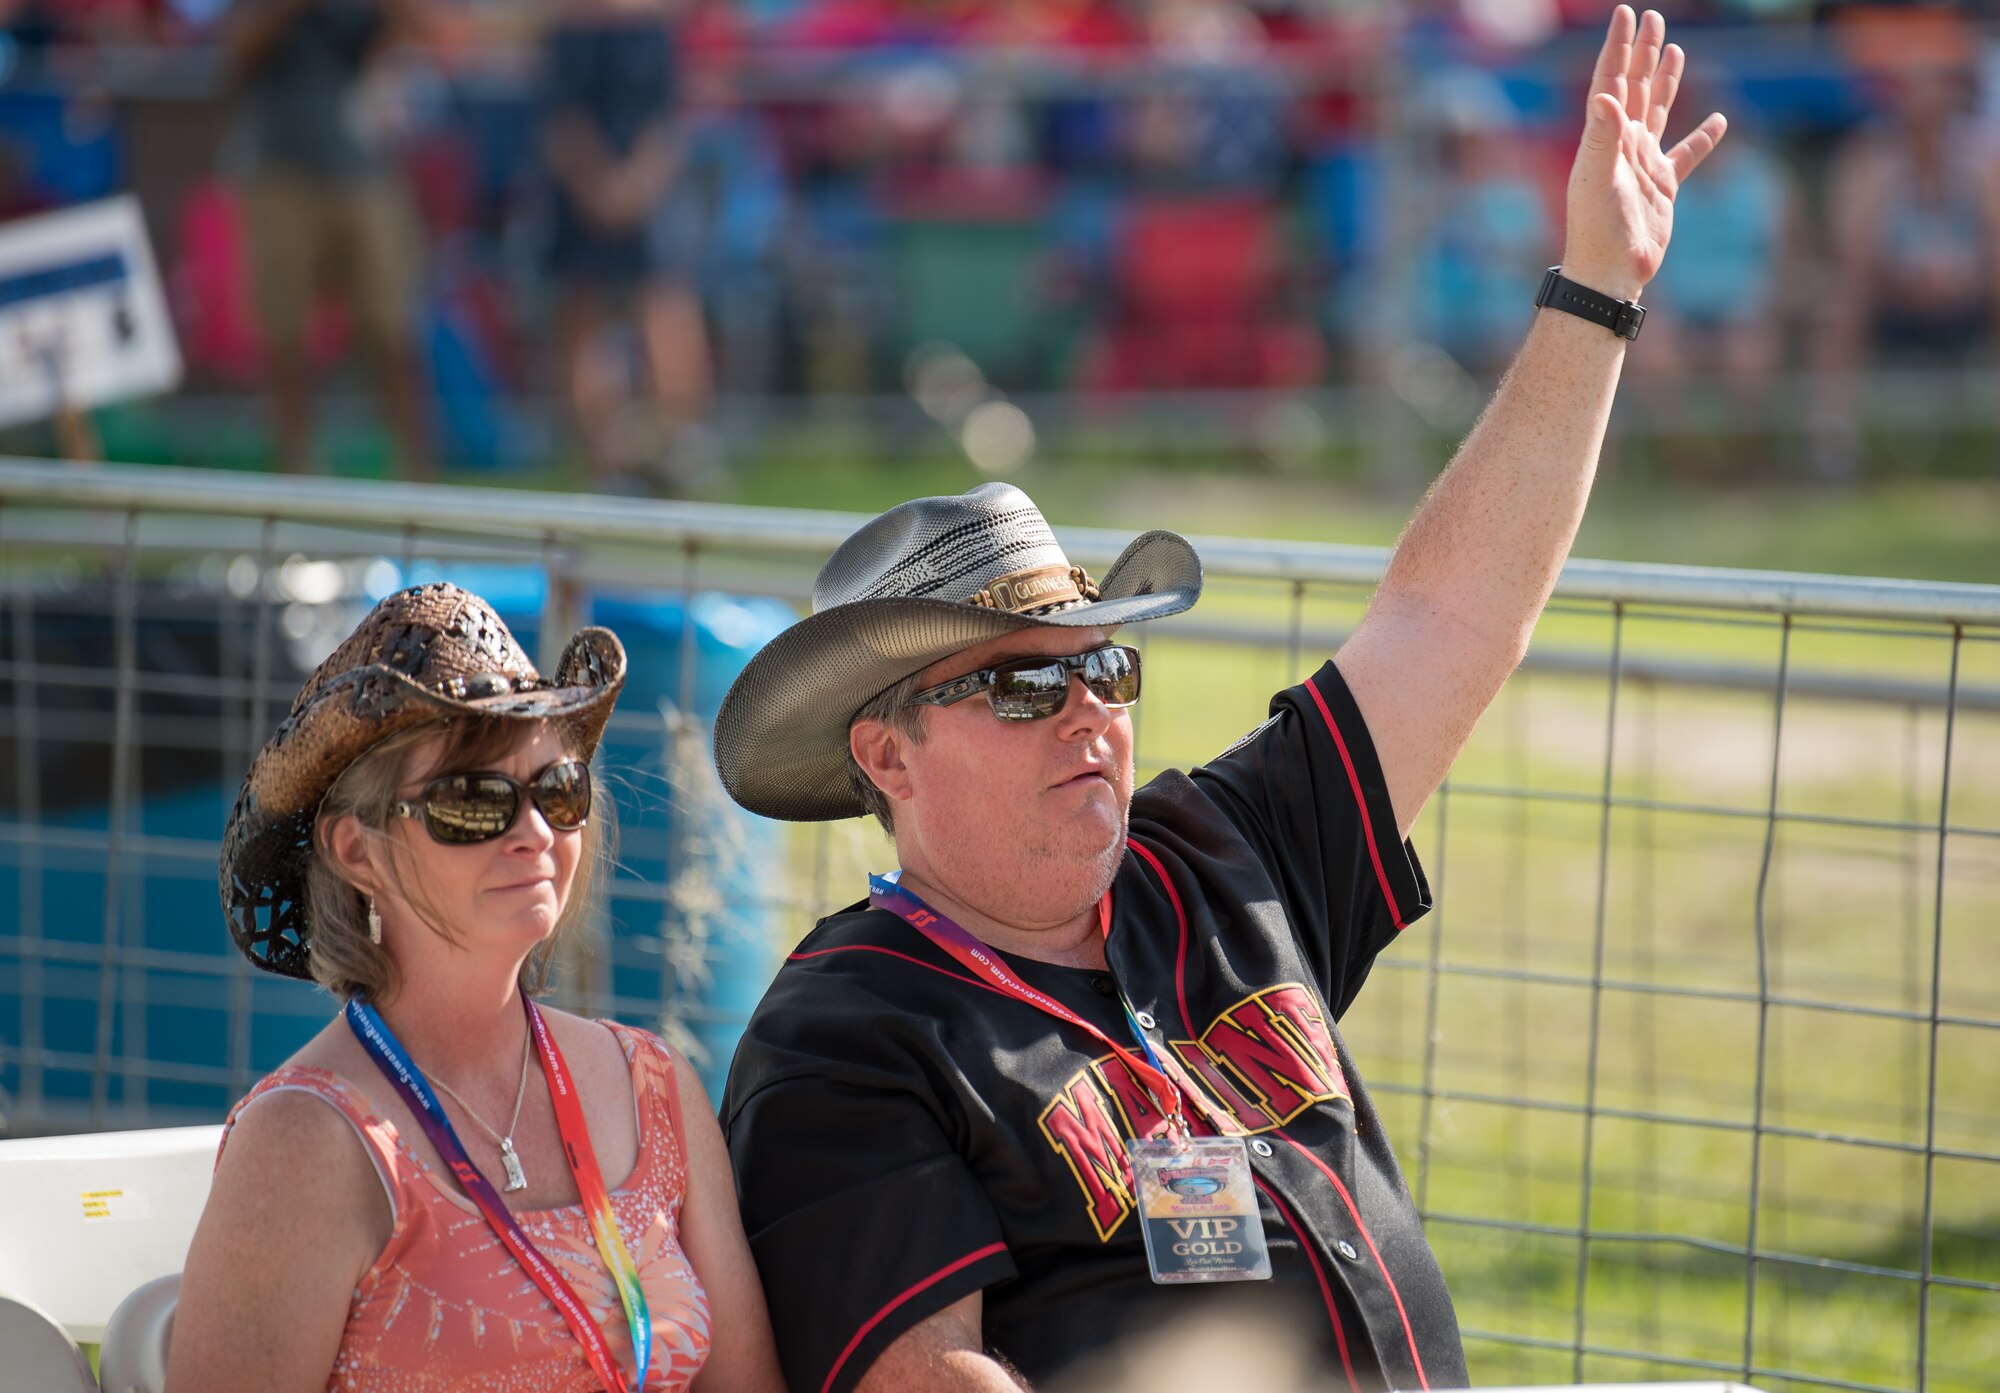 Country music fans enjoy the sounds of Max Impact at the Armed Forces Tribute during the 2019 Suwannee River Jam. This event took place at the Spirit of the Suwannee Music Park on Saturday, May 4, 2019. (U.S. Air Force Photo by Chief Master Sgt. Kevin Burns)